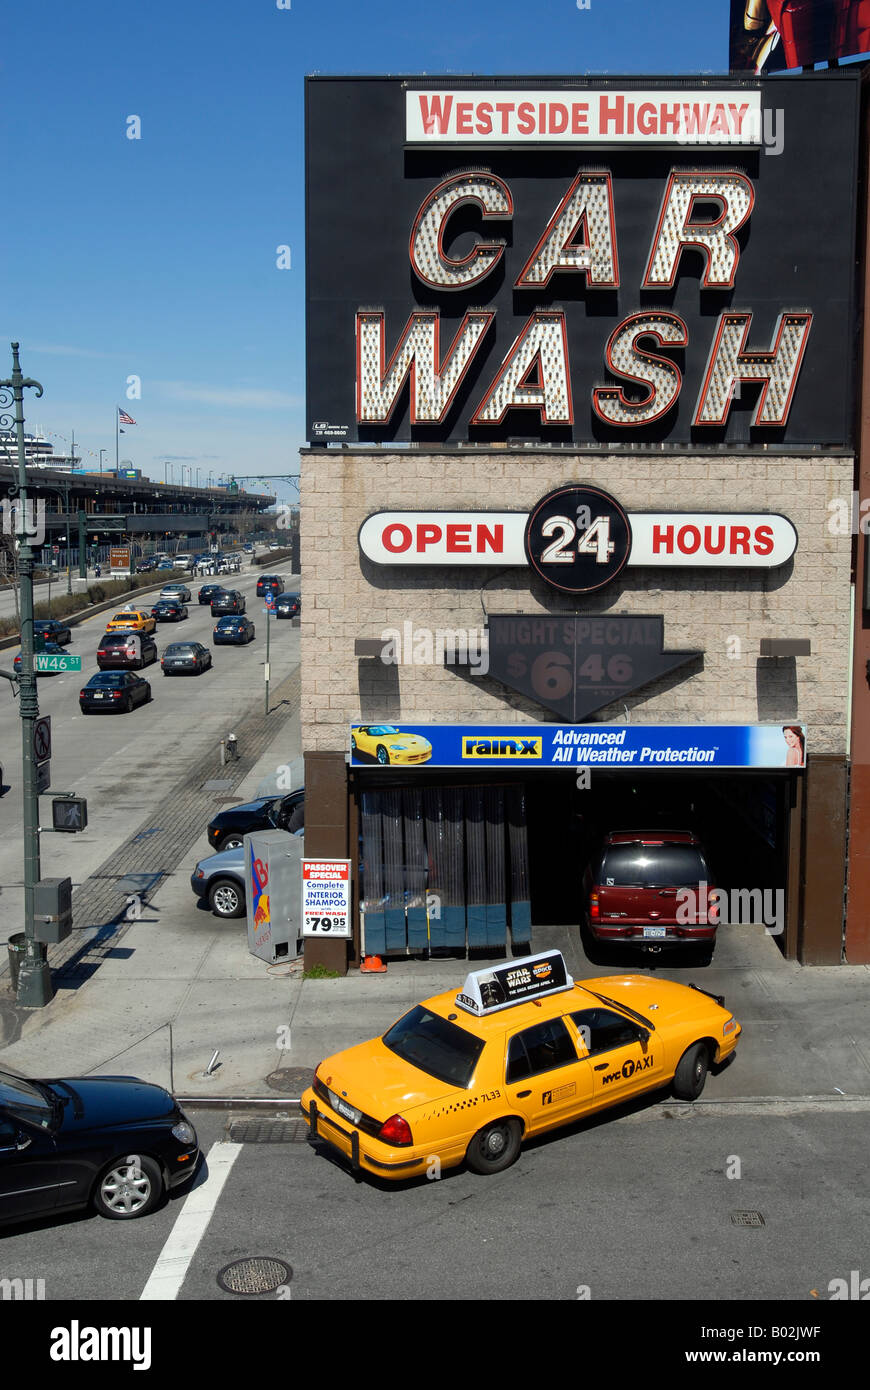 Drivers queue up to wash their cars at the Westside Highway Car Wash in New York Stock Photo